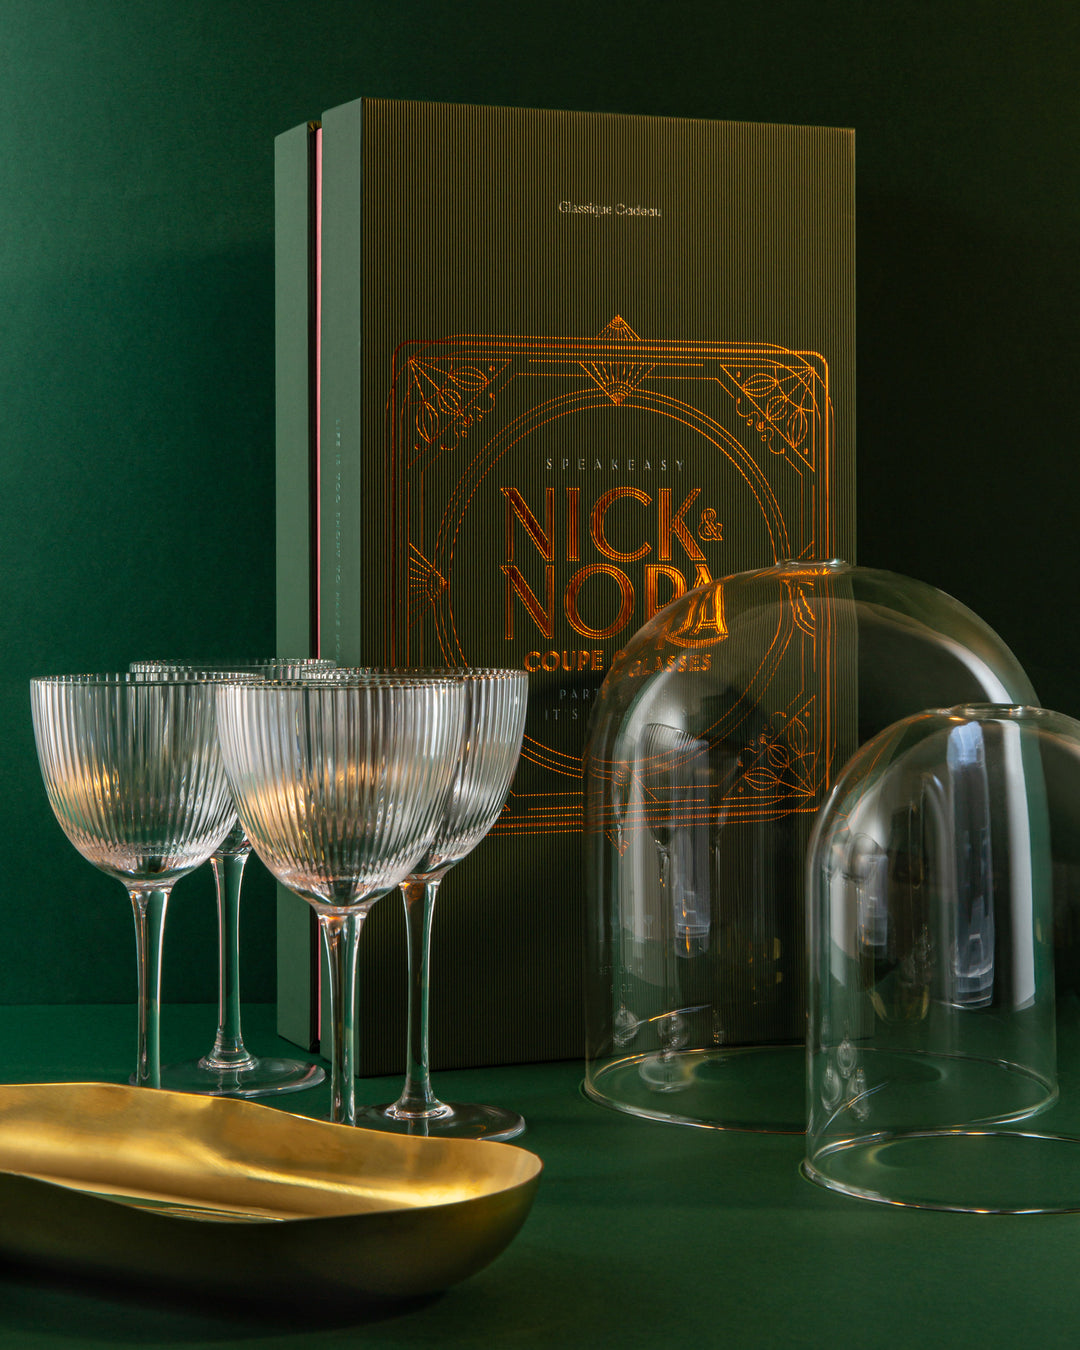 Vintage Art Deco Nick and Nora Coupe Glasses | Set of 4 | 5 oz Crystal Ribbed Cocktail Glassware for Drinking Classic Gin, Whiskey, Vodka Bar Drinks